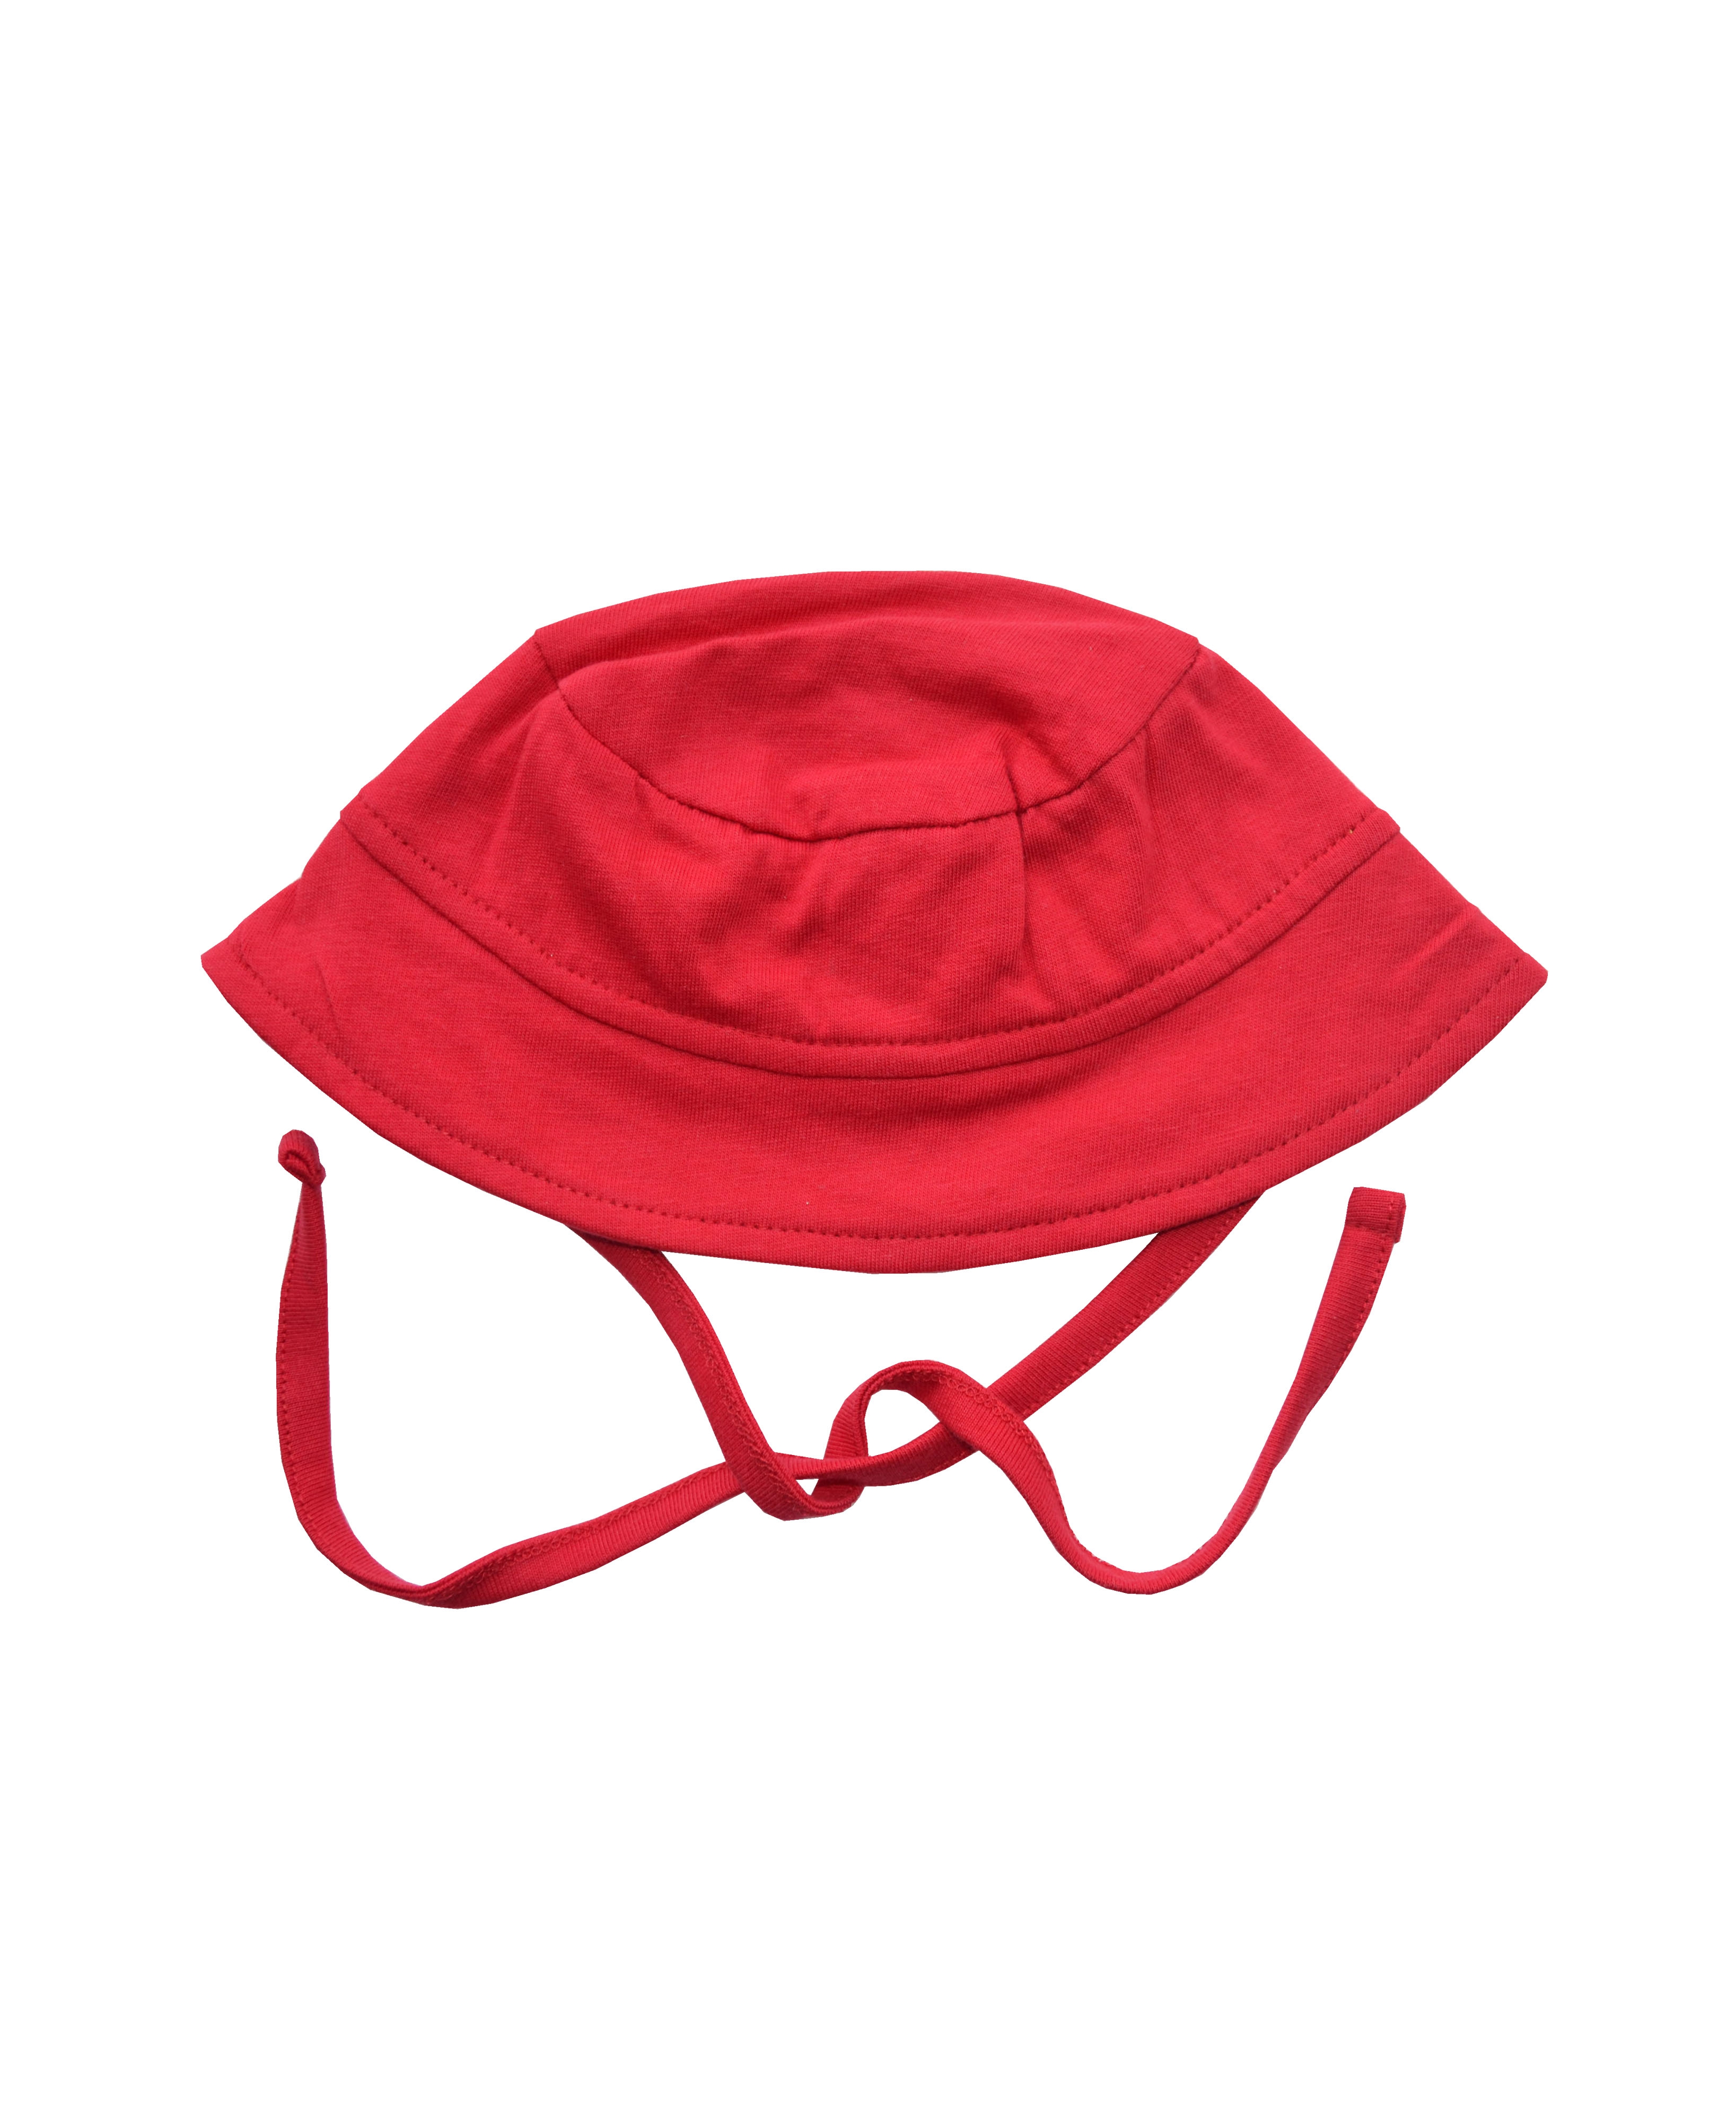 Red Sunhat (100% Cotton Single Jersey)